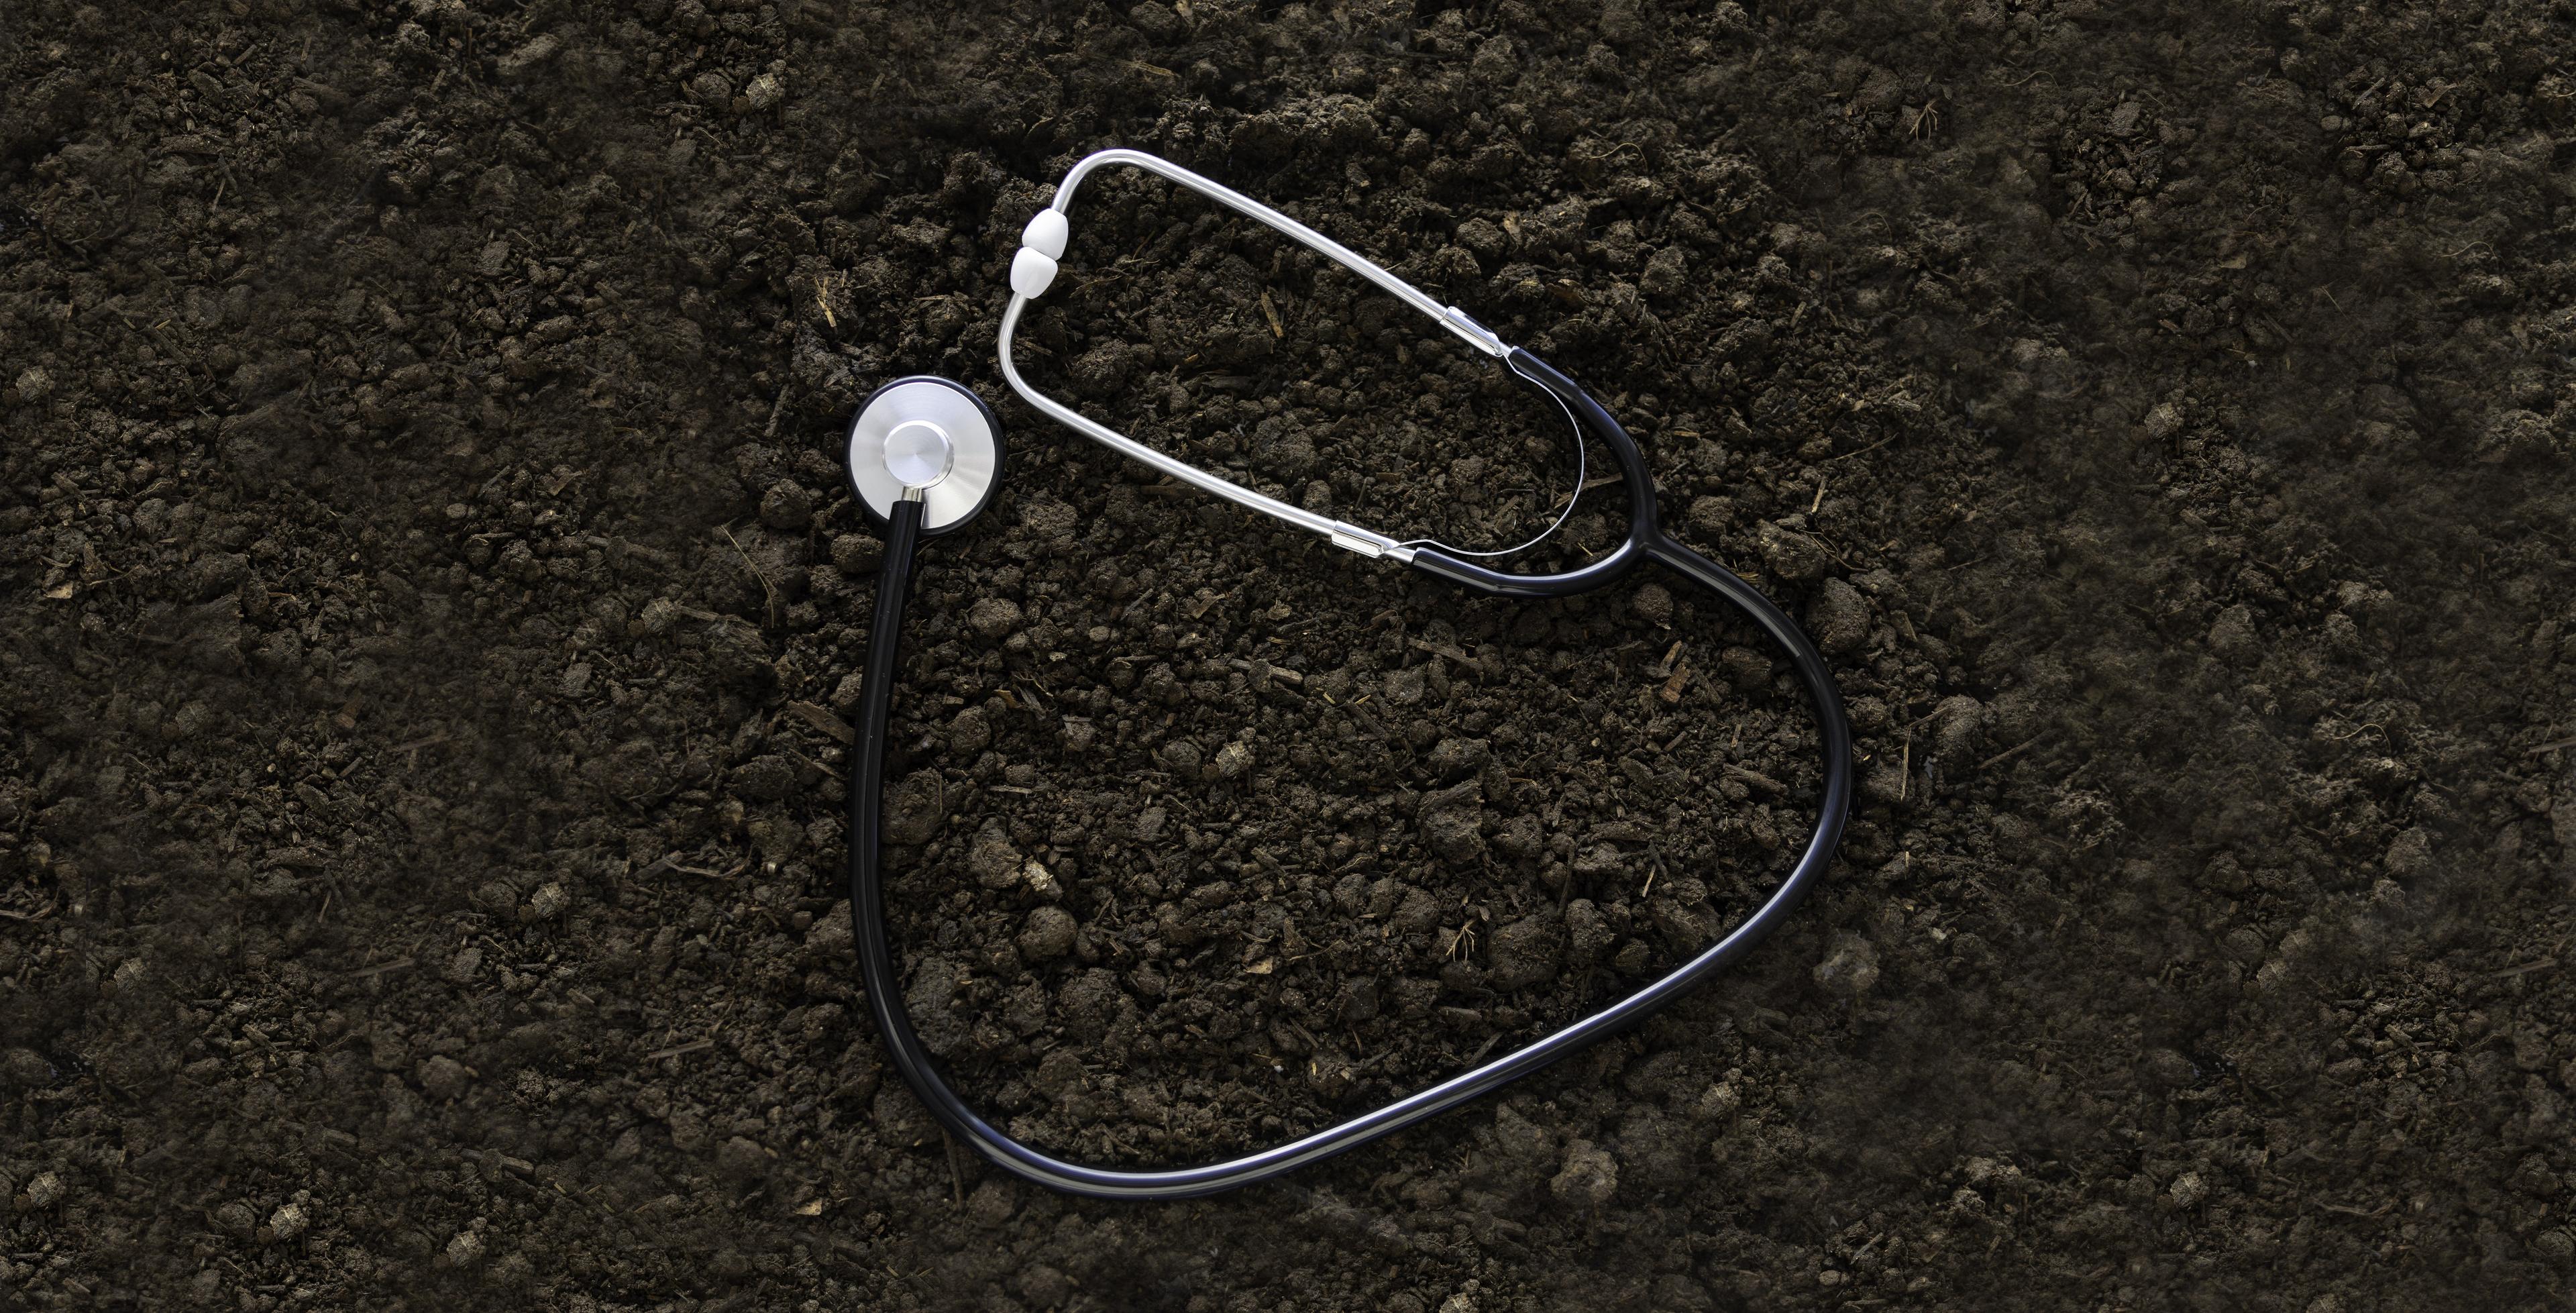 A stethoscope lays on a patch of soil.